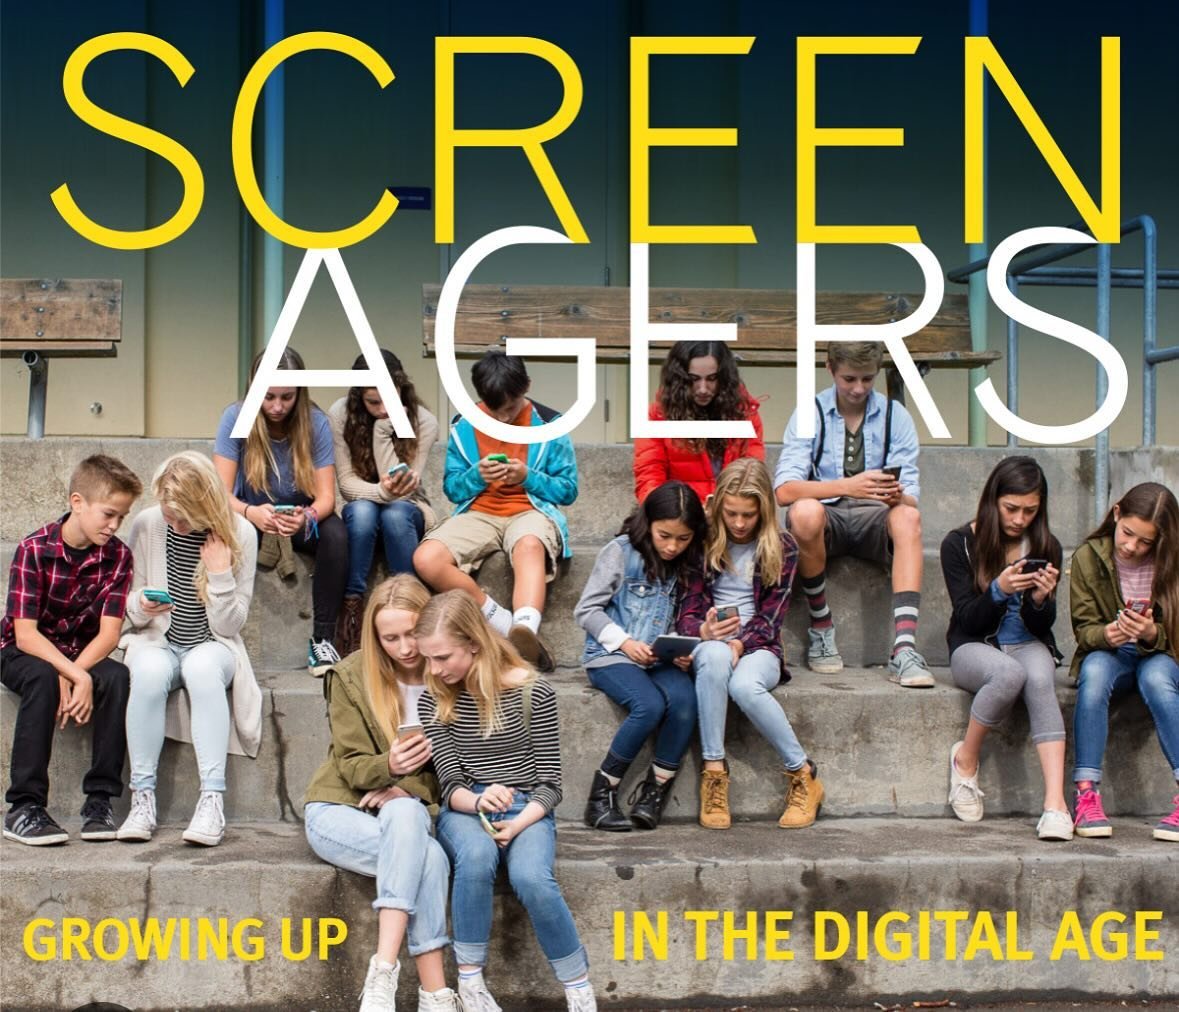 The 3rd showing of Screenagers has been scheduled for tomorrow, Wednesday, May 1, at 6:00 PM. The title is: Under the Influence, addressing vaping, drugs and alcohol in the digital age. #wearestals